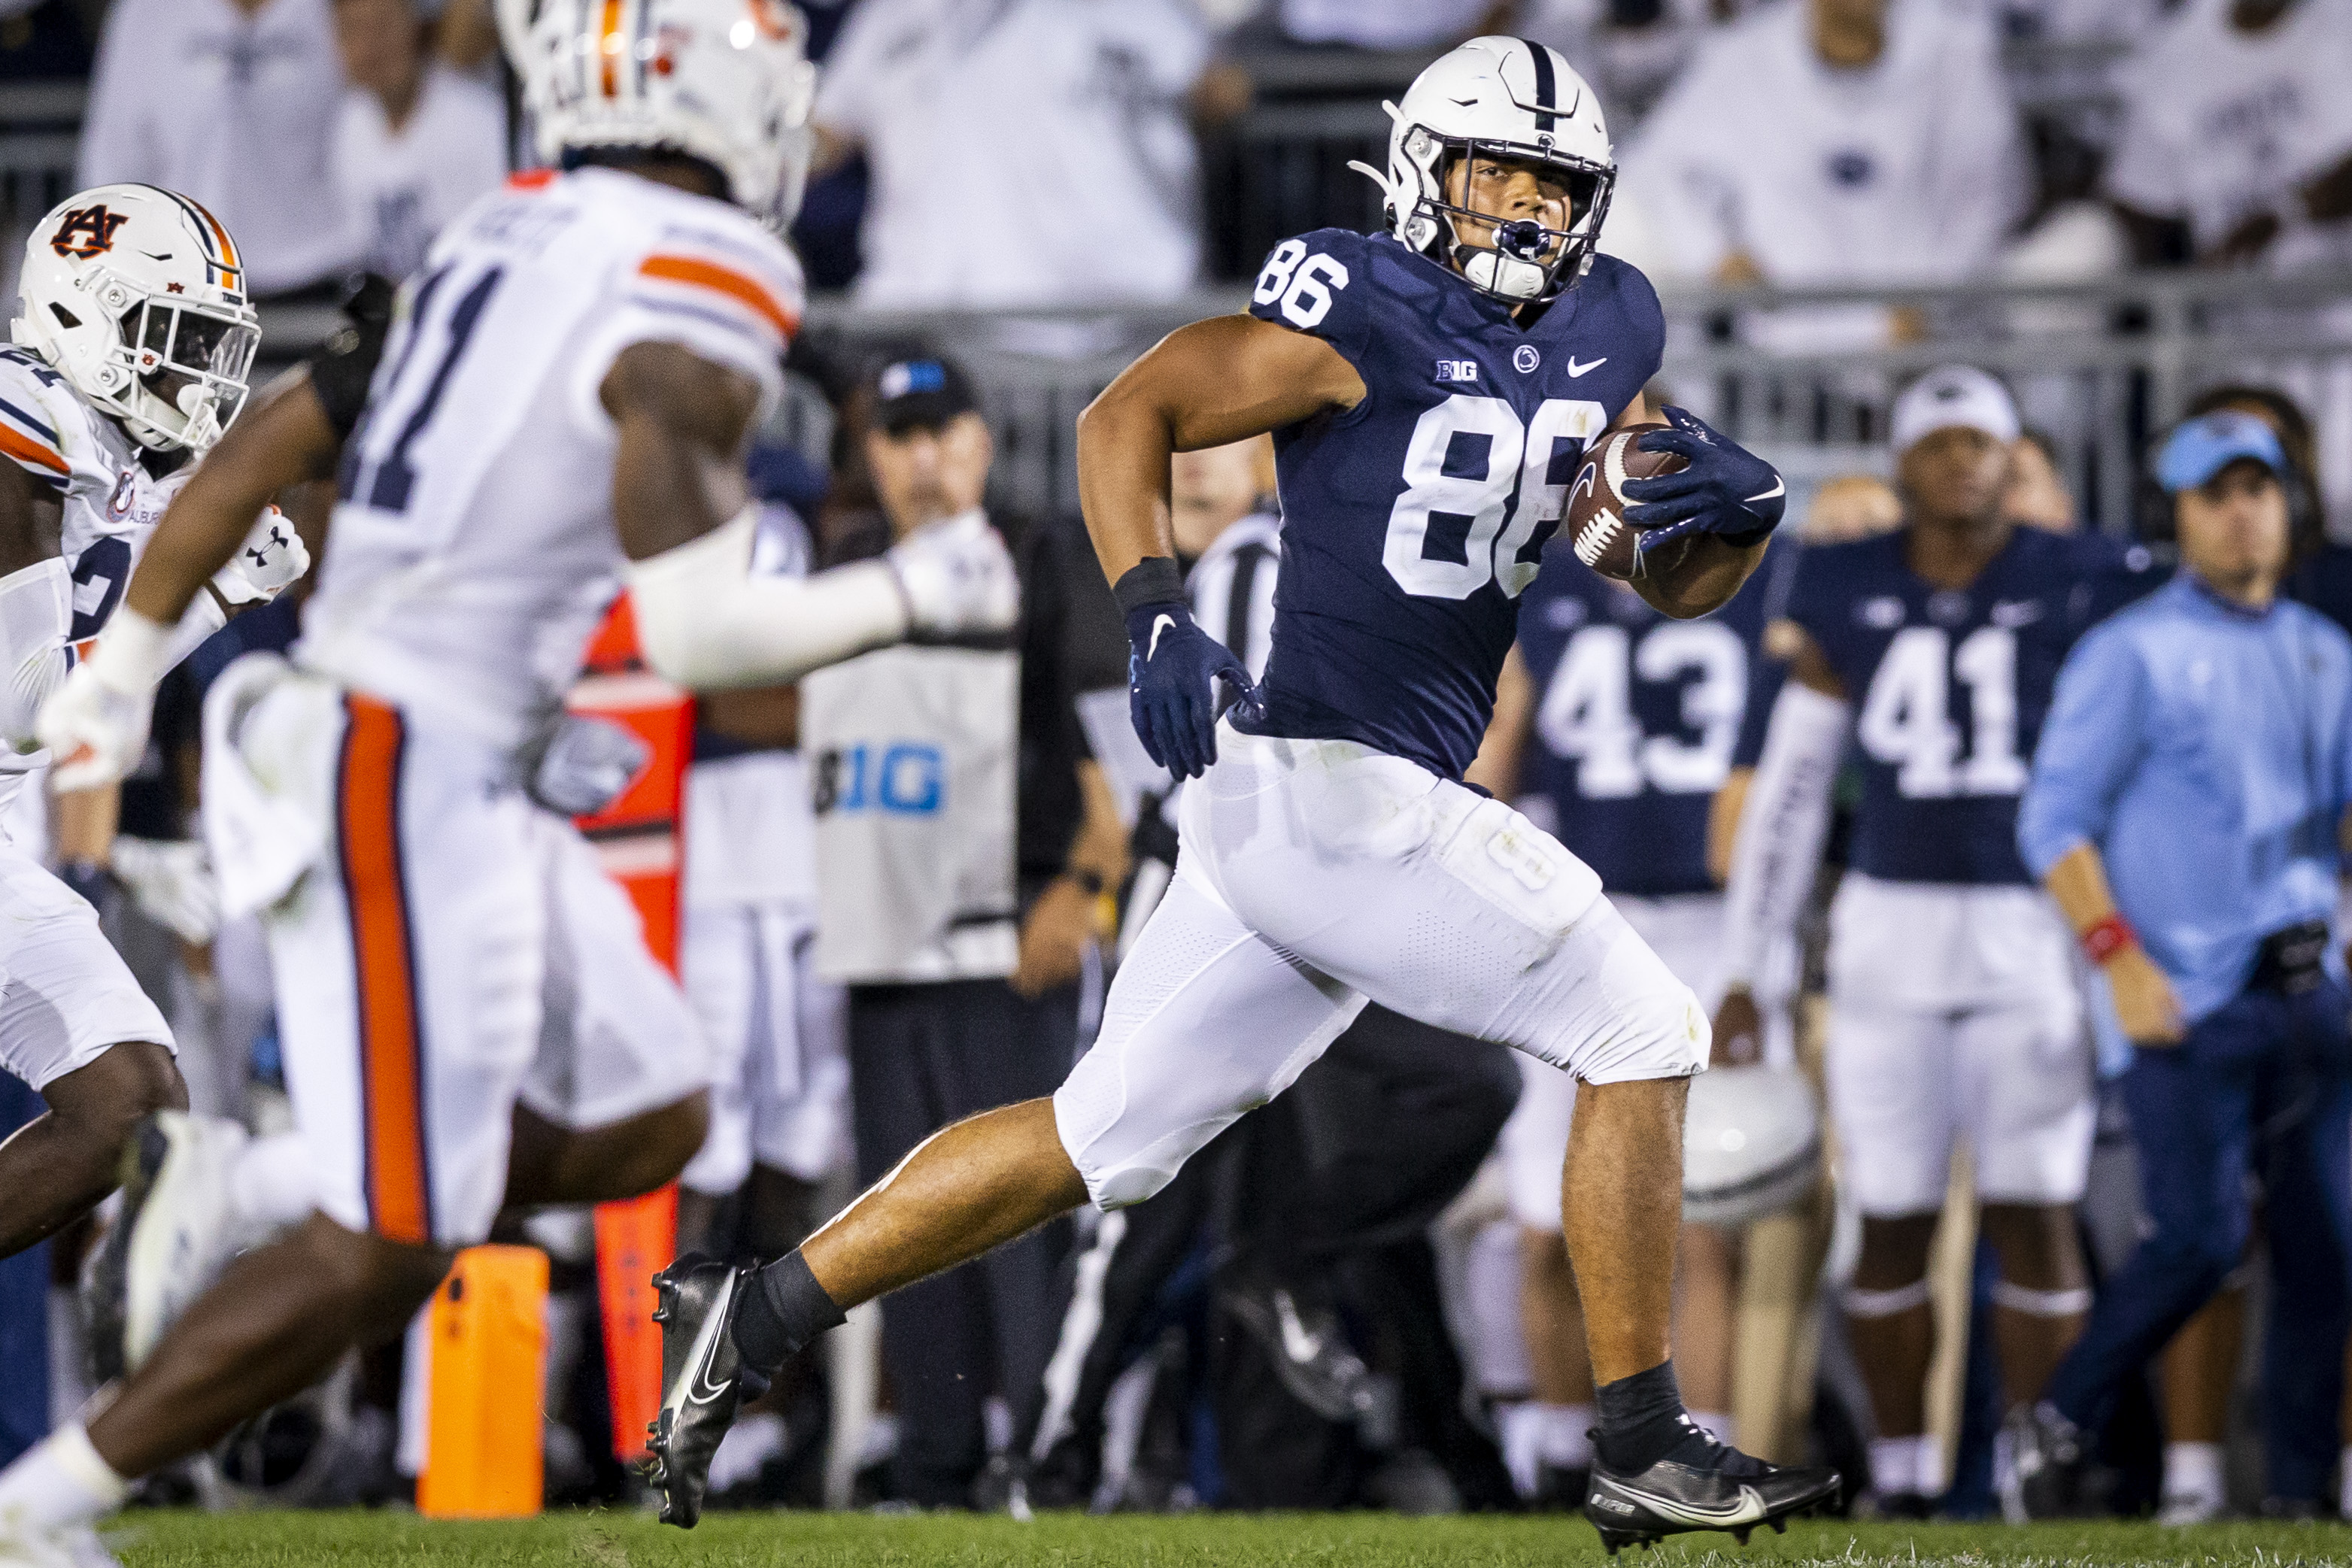 Penn State-Auburn free live stream (09/17/22) How to watch college football, what to watch, time, channel